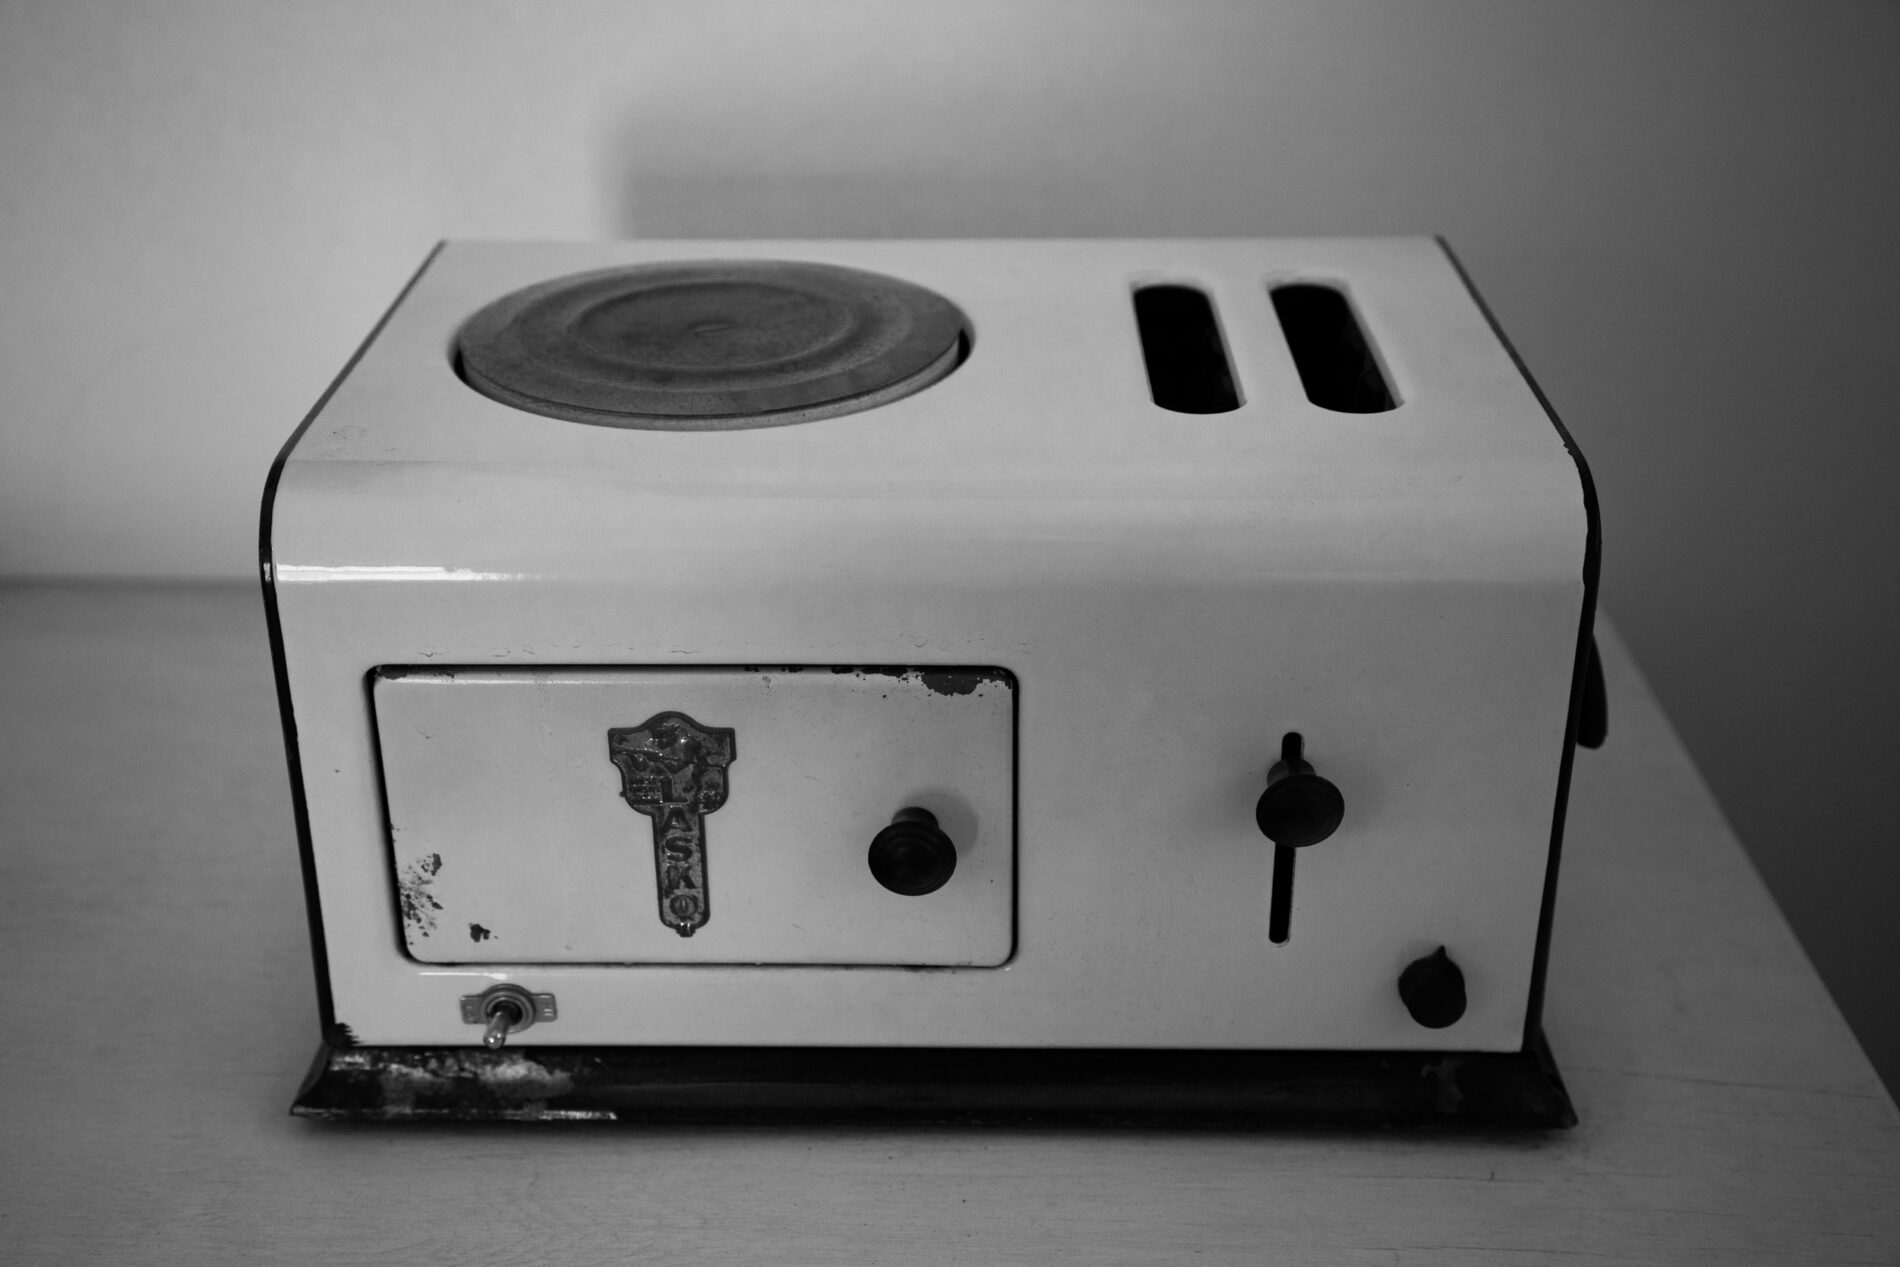 An example of the small appliances allowed in the blocks. This cooker includes a toaster, burner, and even small oven.